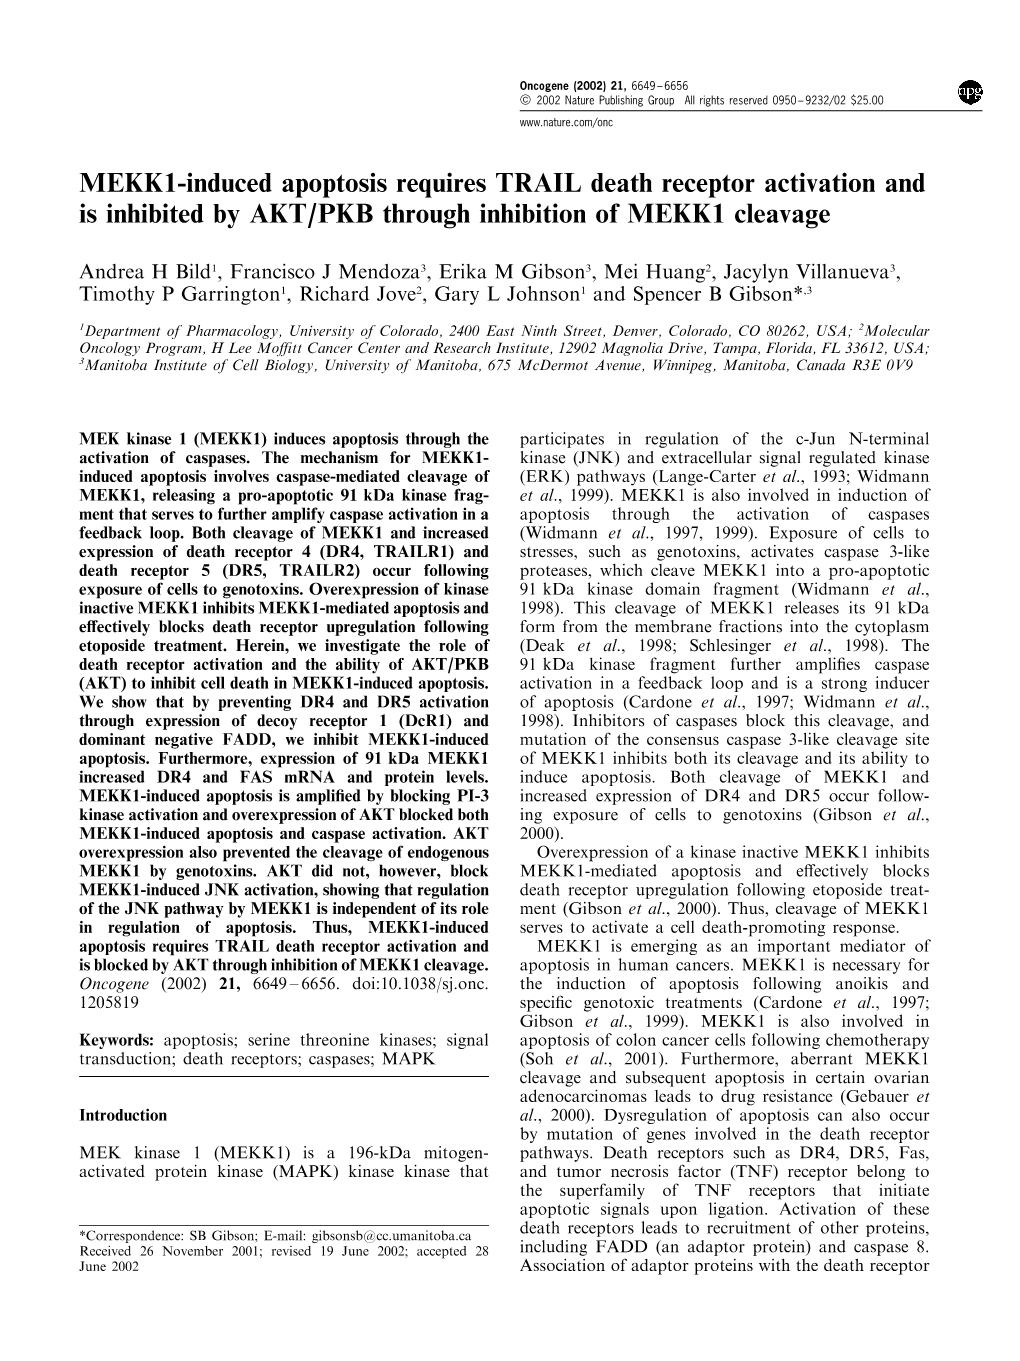 MEKK1-Induced Apoptosis Requires TRAIL Death Receptor Activation and Is Inhibited by AKT/PKB Through Inhibition of MEKK1 Cleavage